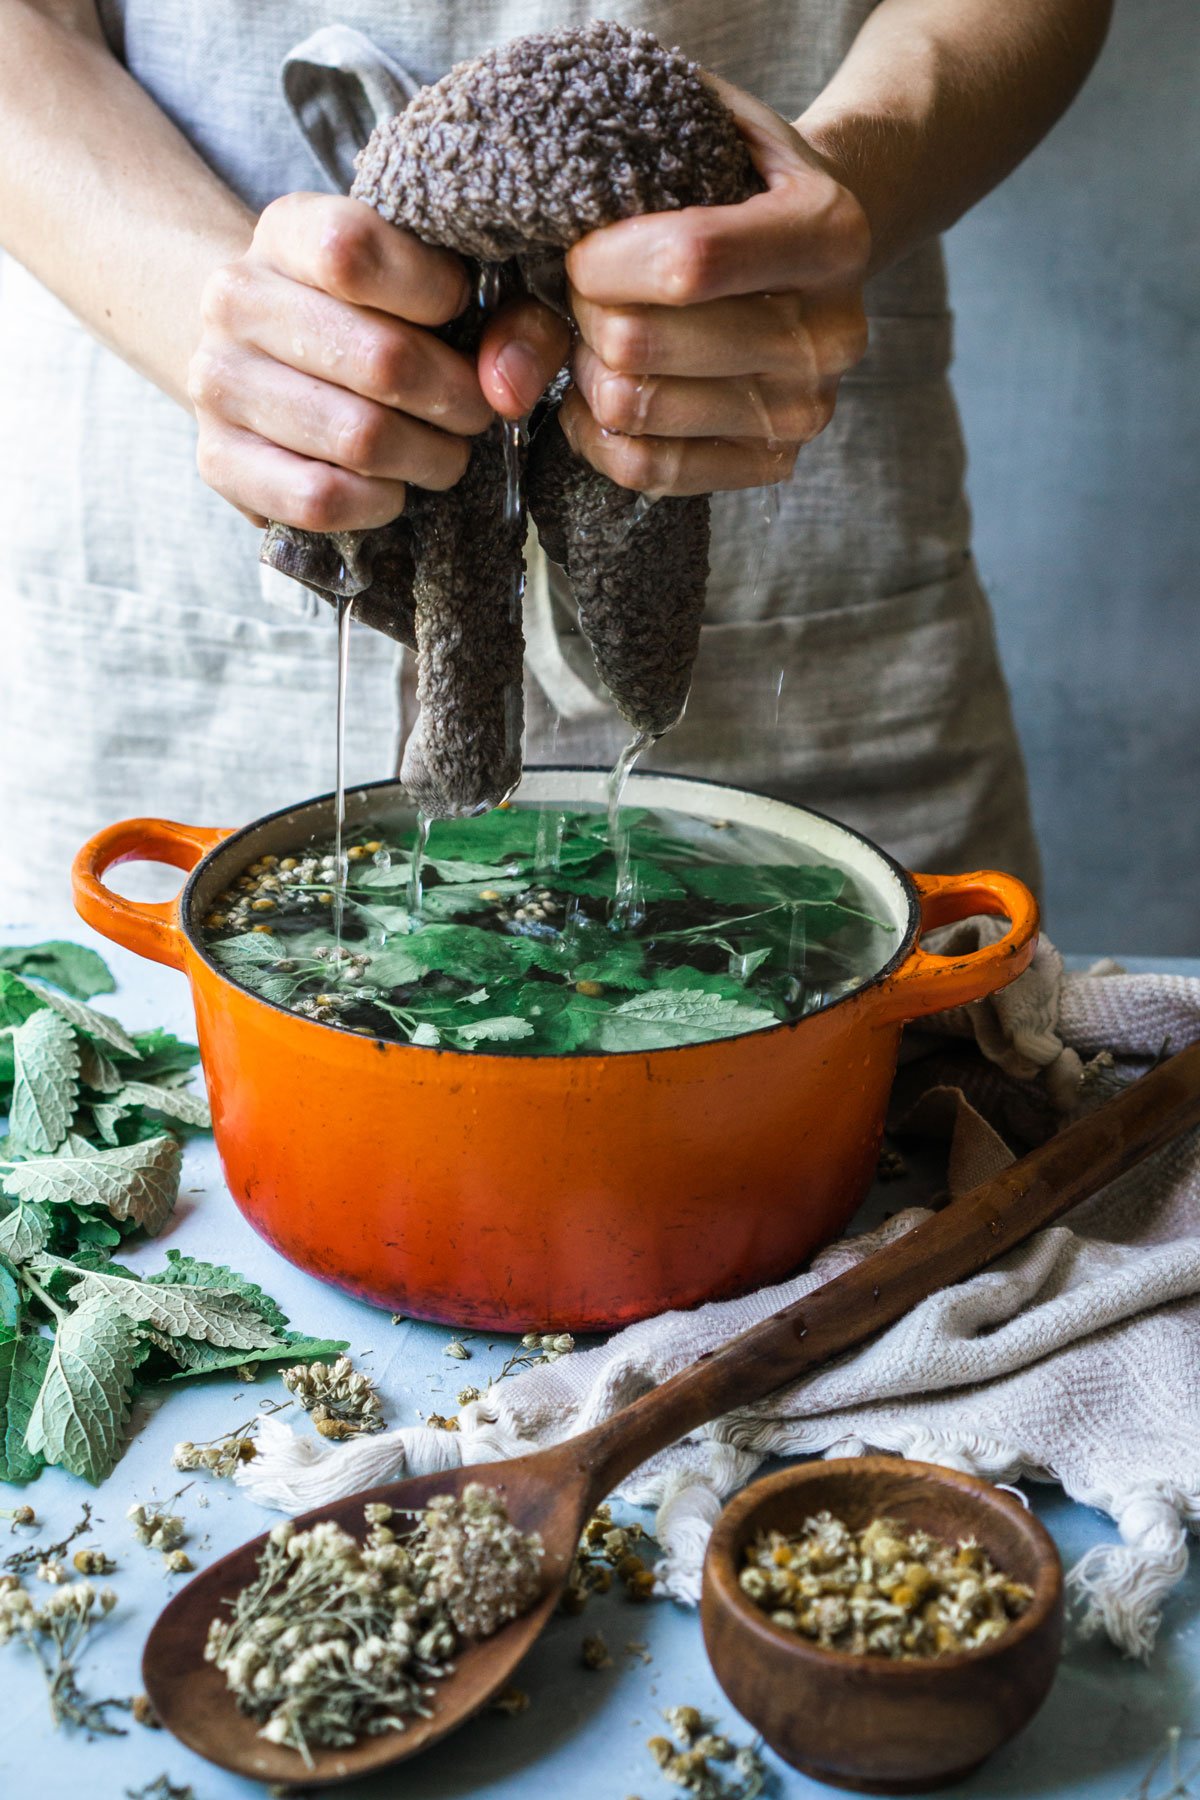 Try A Cooling Herbal Compress for Hot Summer Days | Herbal Academy | One way to keep the heat at bay while enjoying summer weather is to make a cooling herbal compress from herbs like peppermint, yarrow, and chamomile.